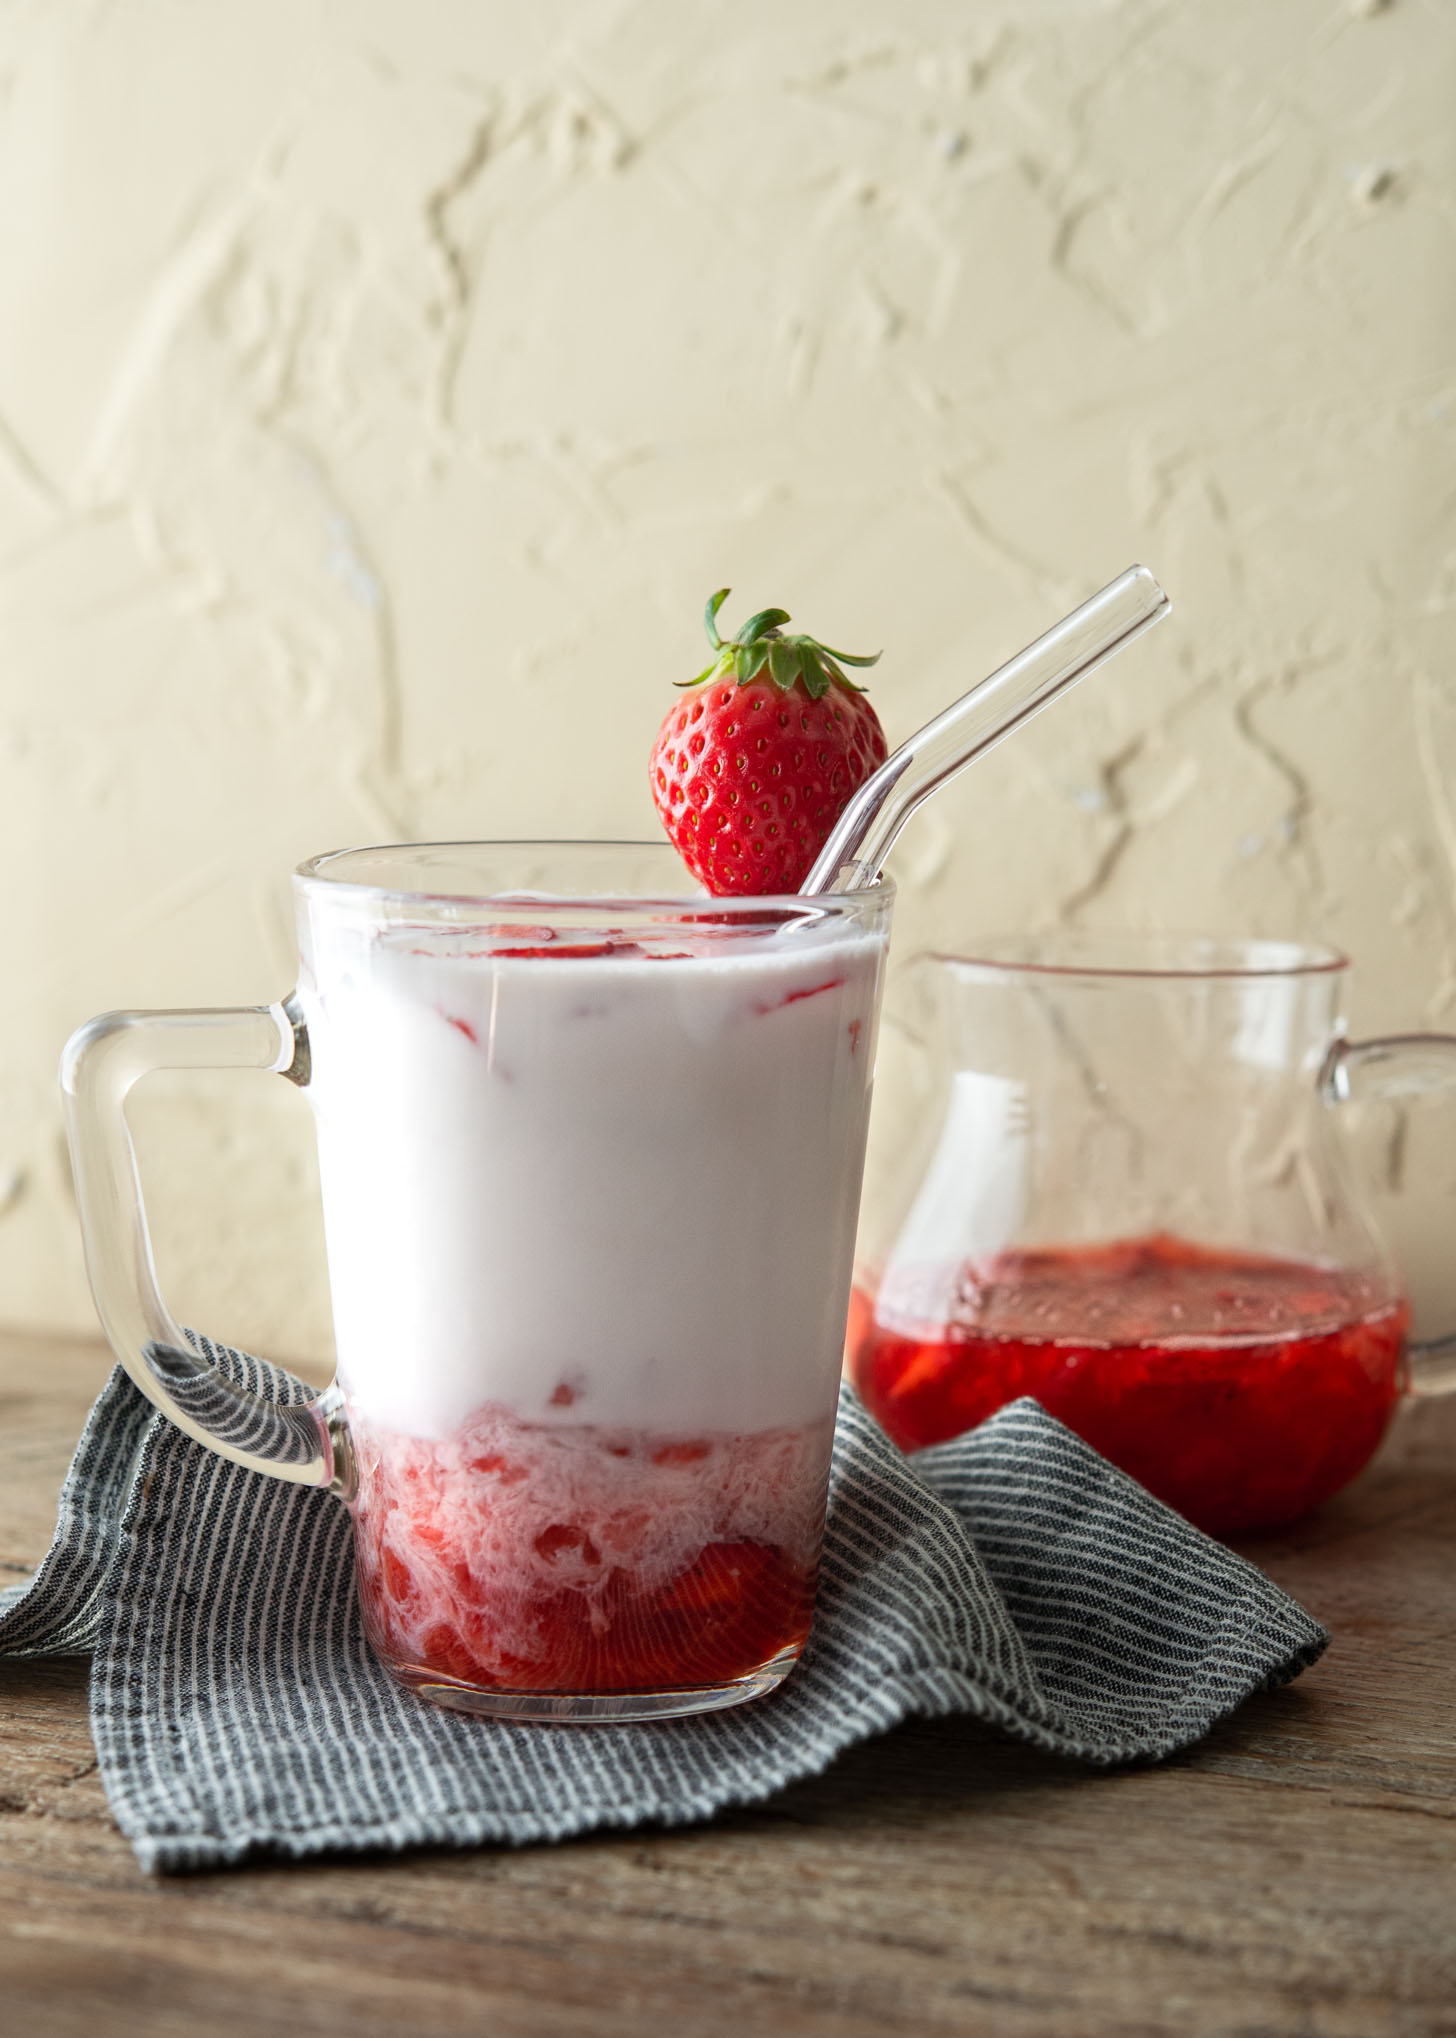 Korean strawberry milk in a glass cup garnished with a piece of strawberry.